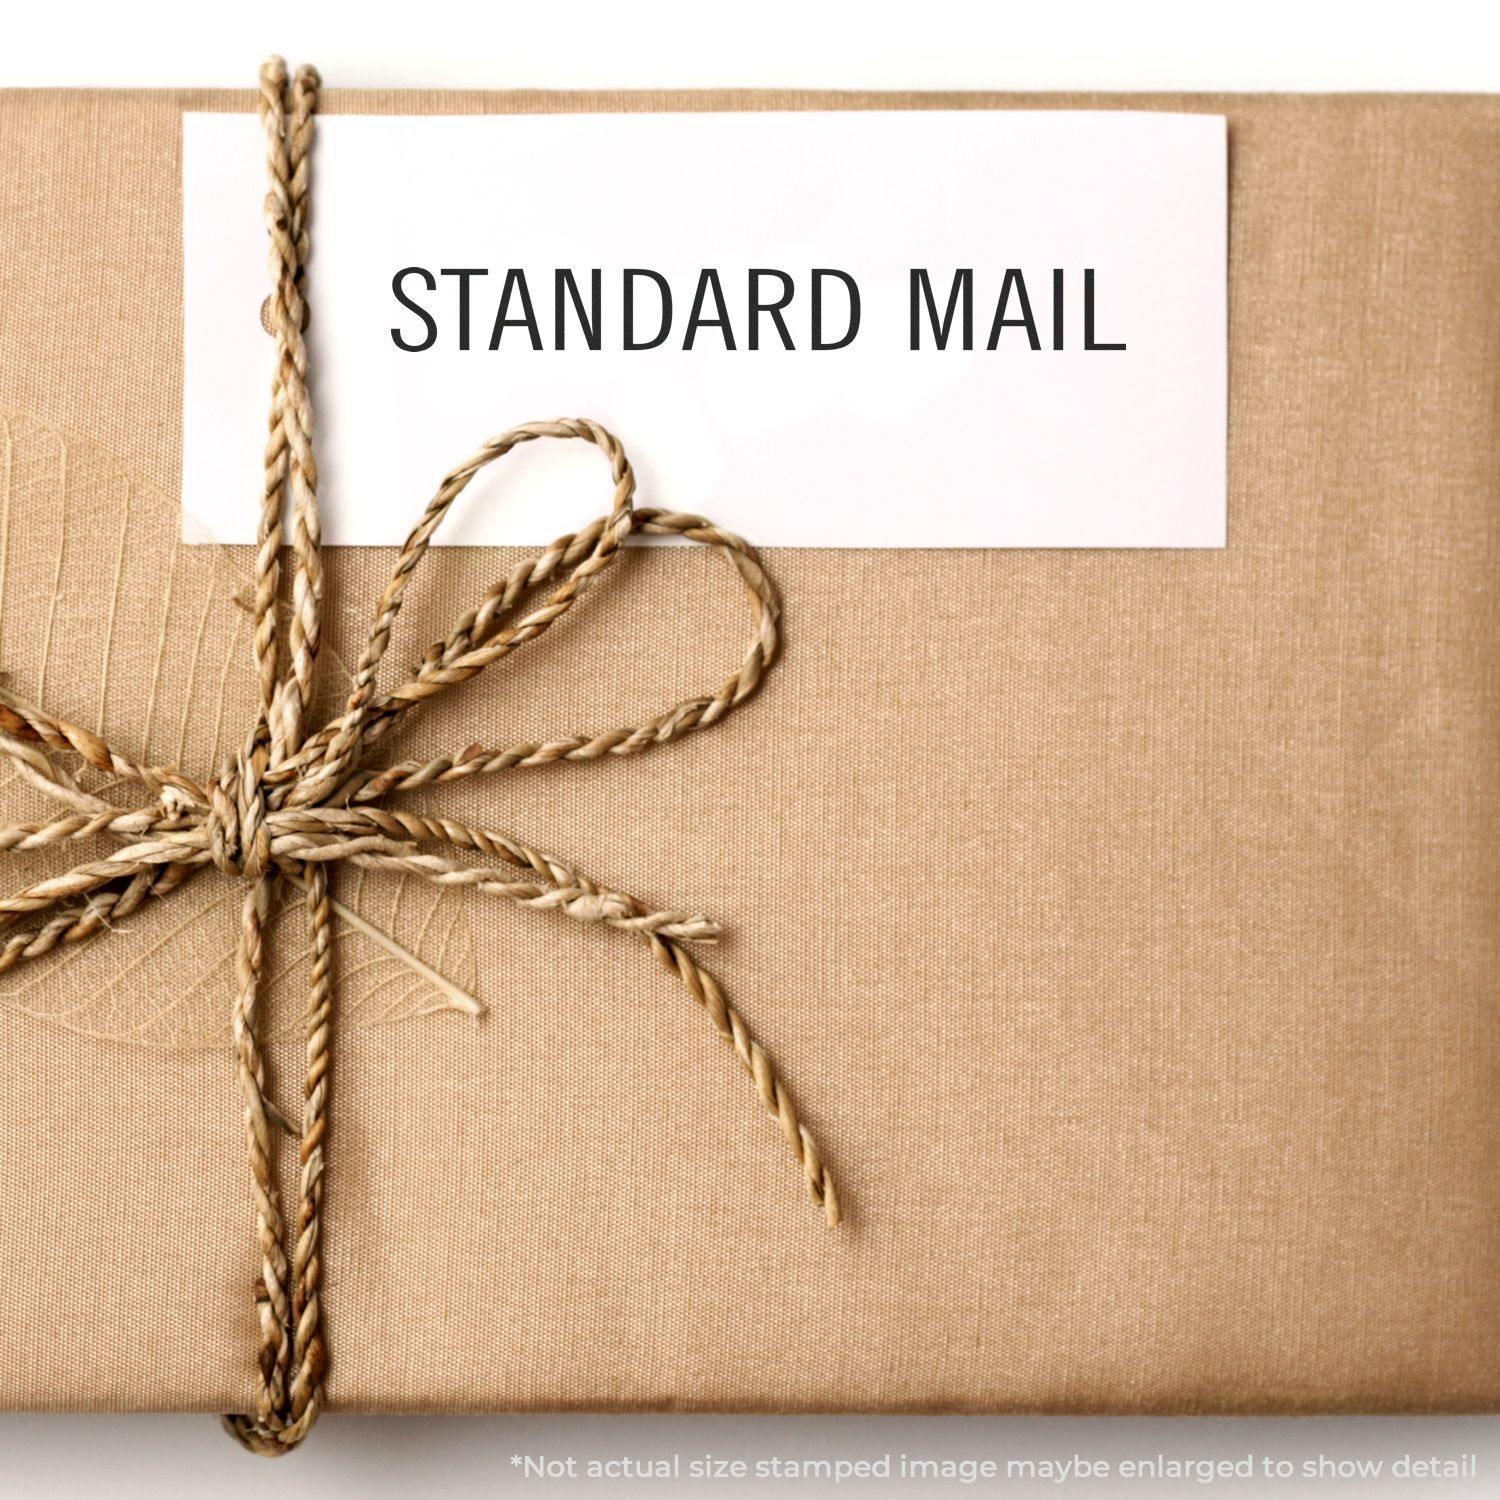 A self-inking stamp with a stamped image showing how the text "STANDARD MAIL" is displayed after stamping.